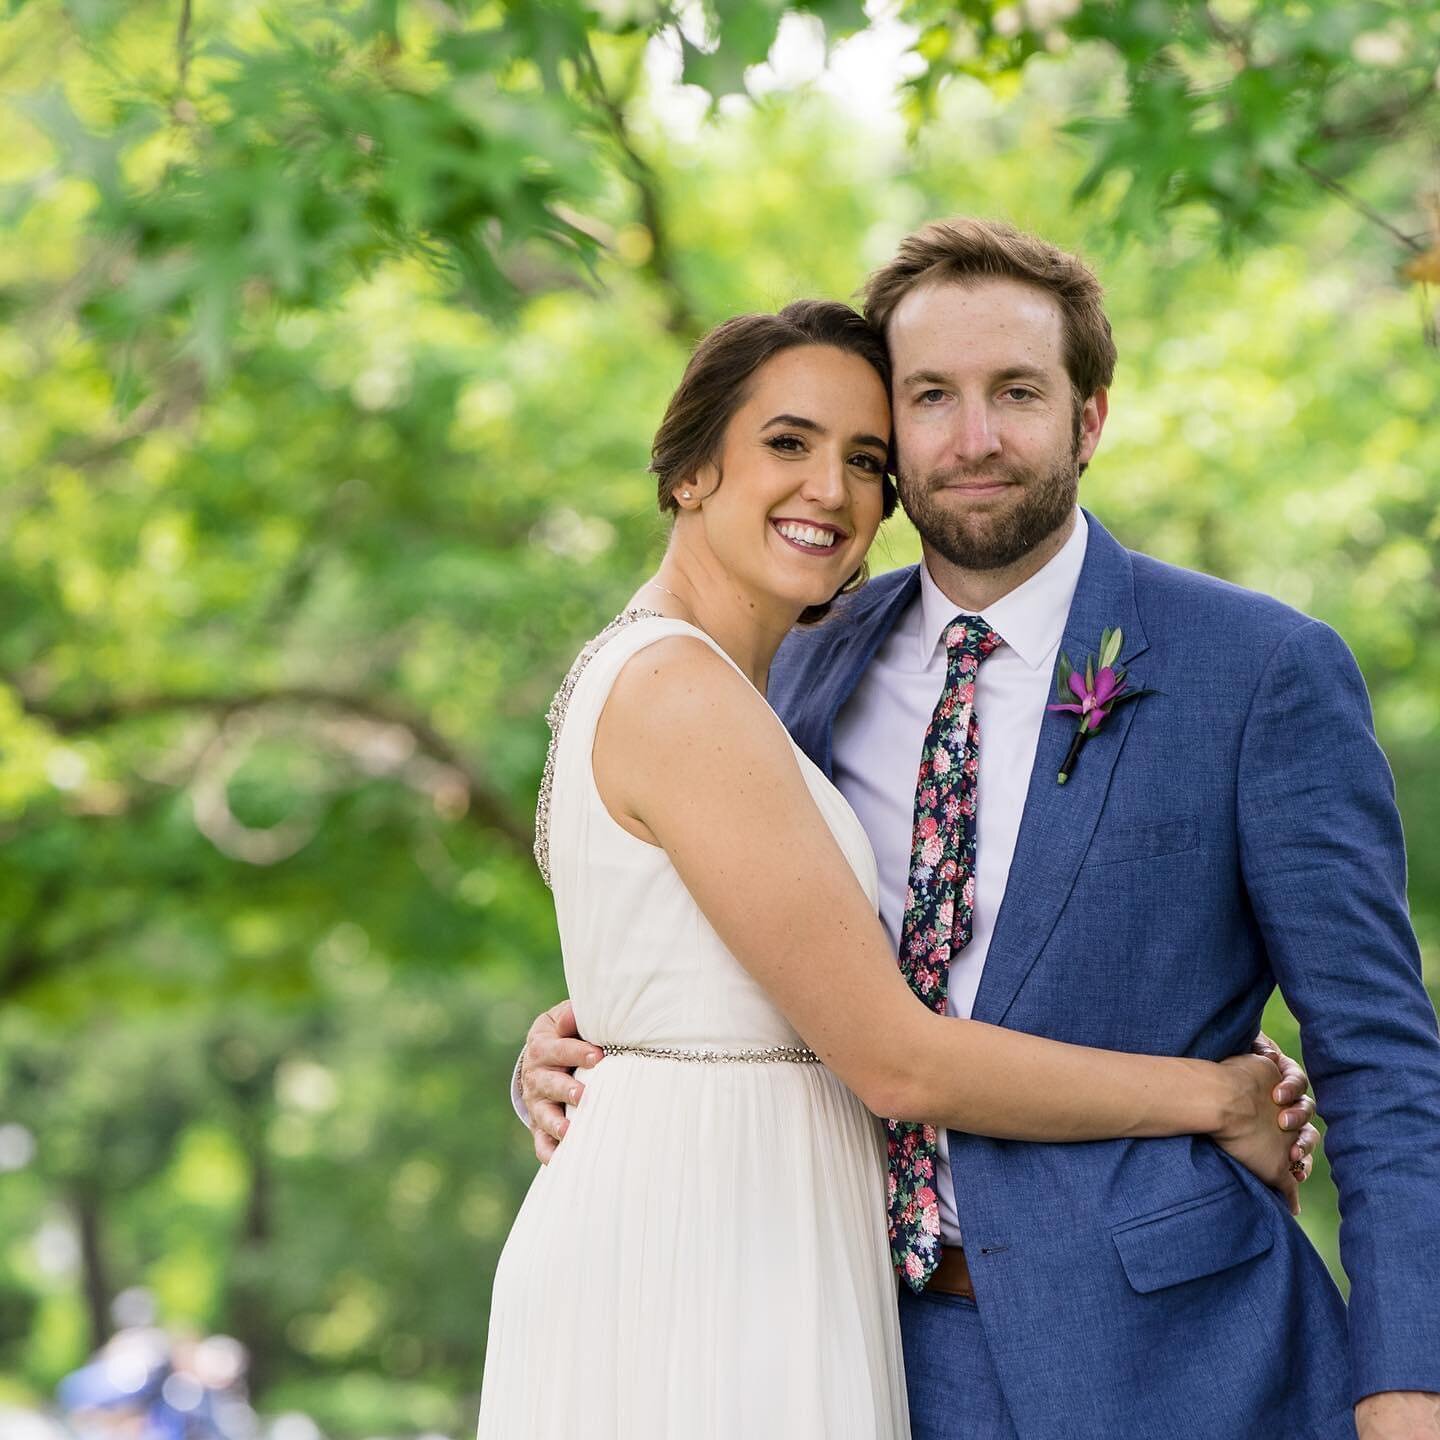 Wishing the happiest of  anniversaries to Mara + RJ! We&rsquo;re thrillled that they&rsquo;re now expecting their 1st Baby T very soon! 

From bright {hanging} flowers, periodic table of tables, Delorians, and cross country guests, this wedding will 